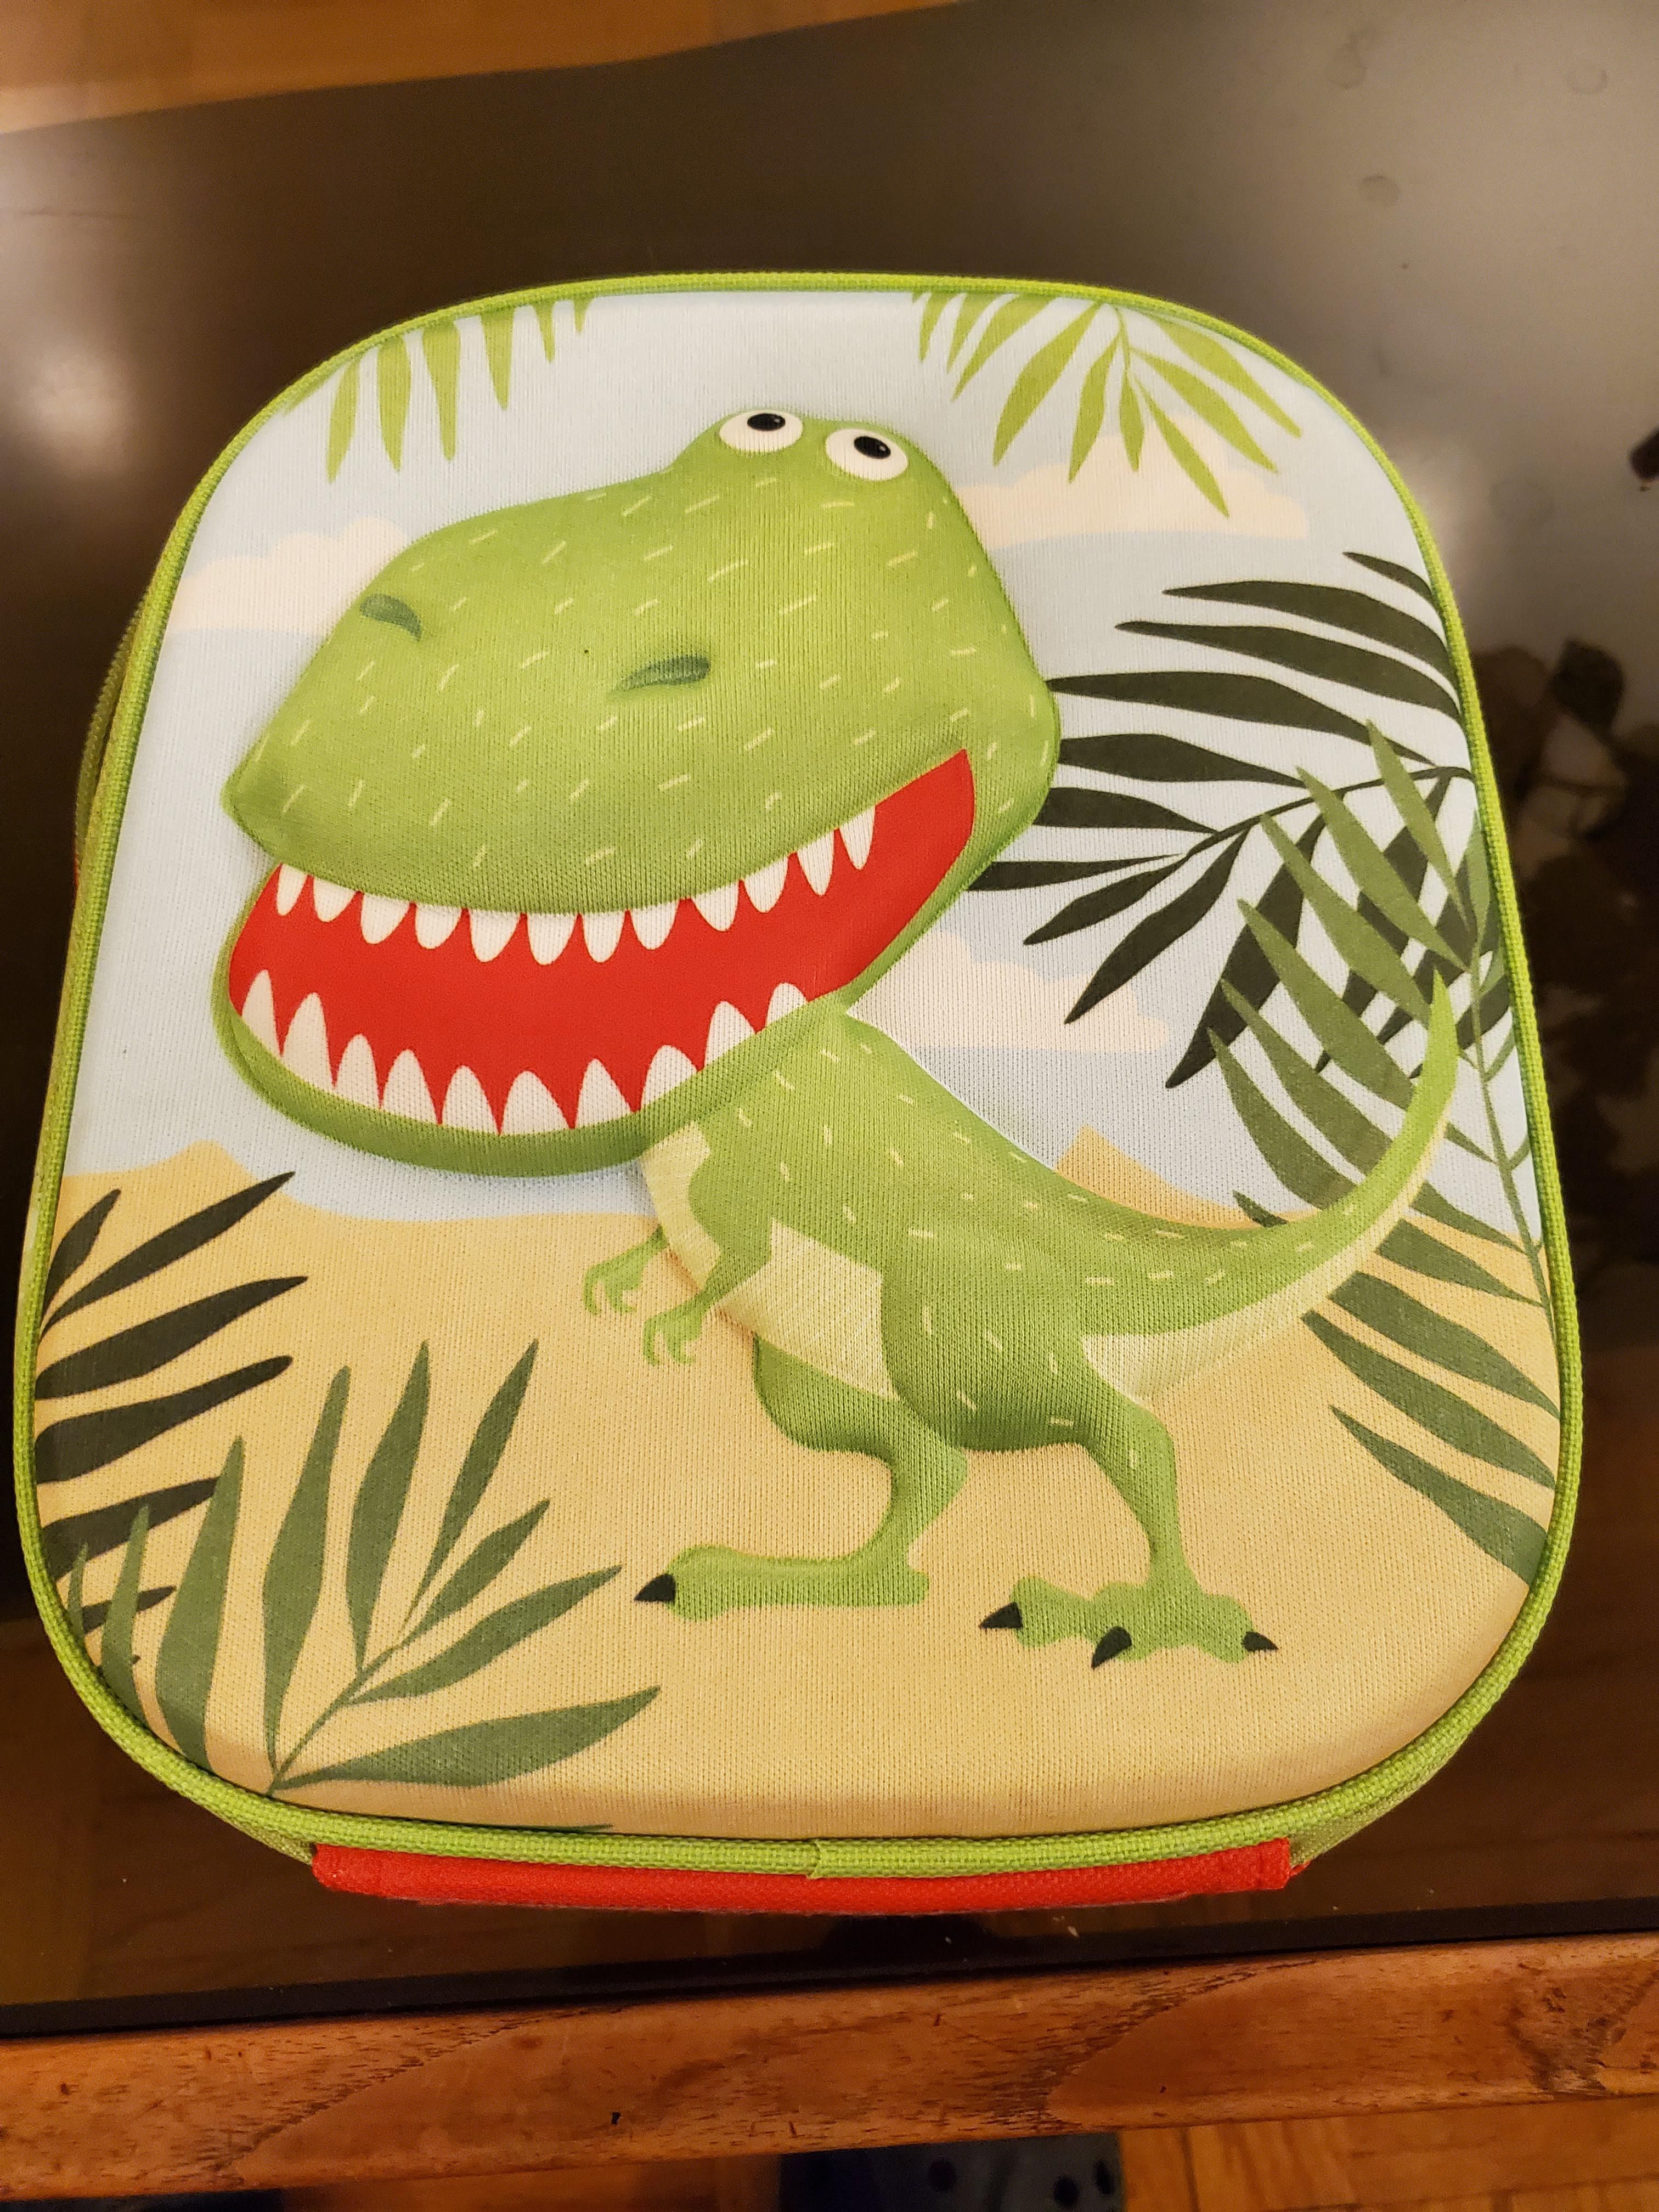 Told my wife that I don't care what my coworkers think. I want this lunch bag.